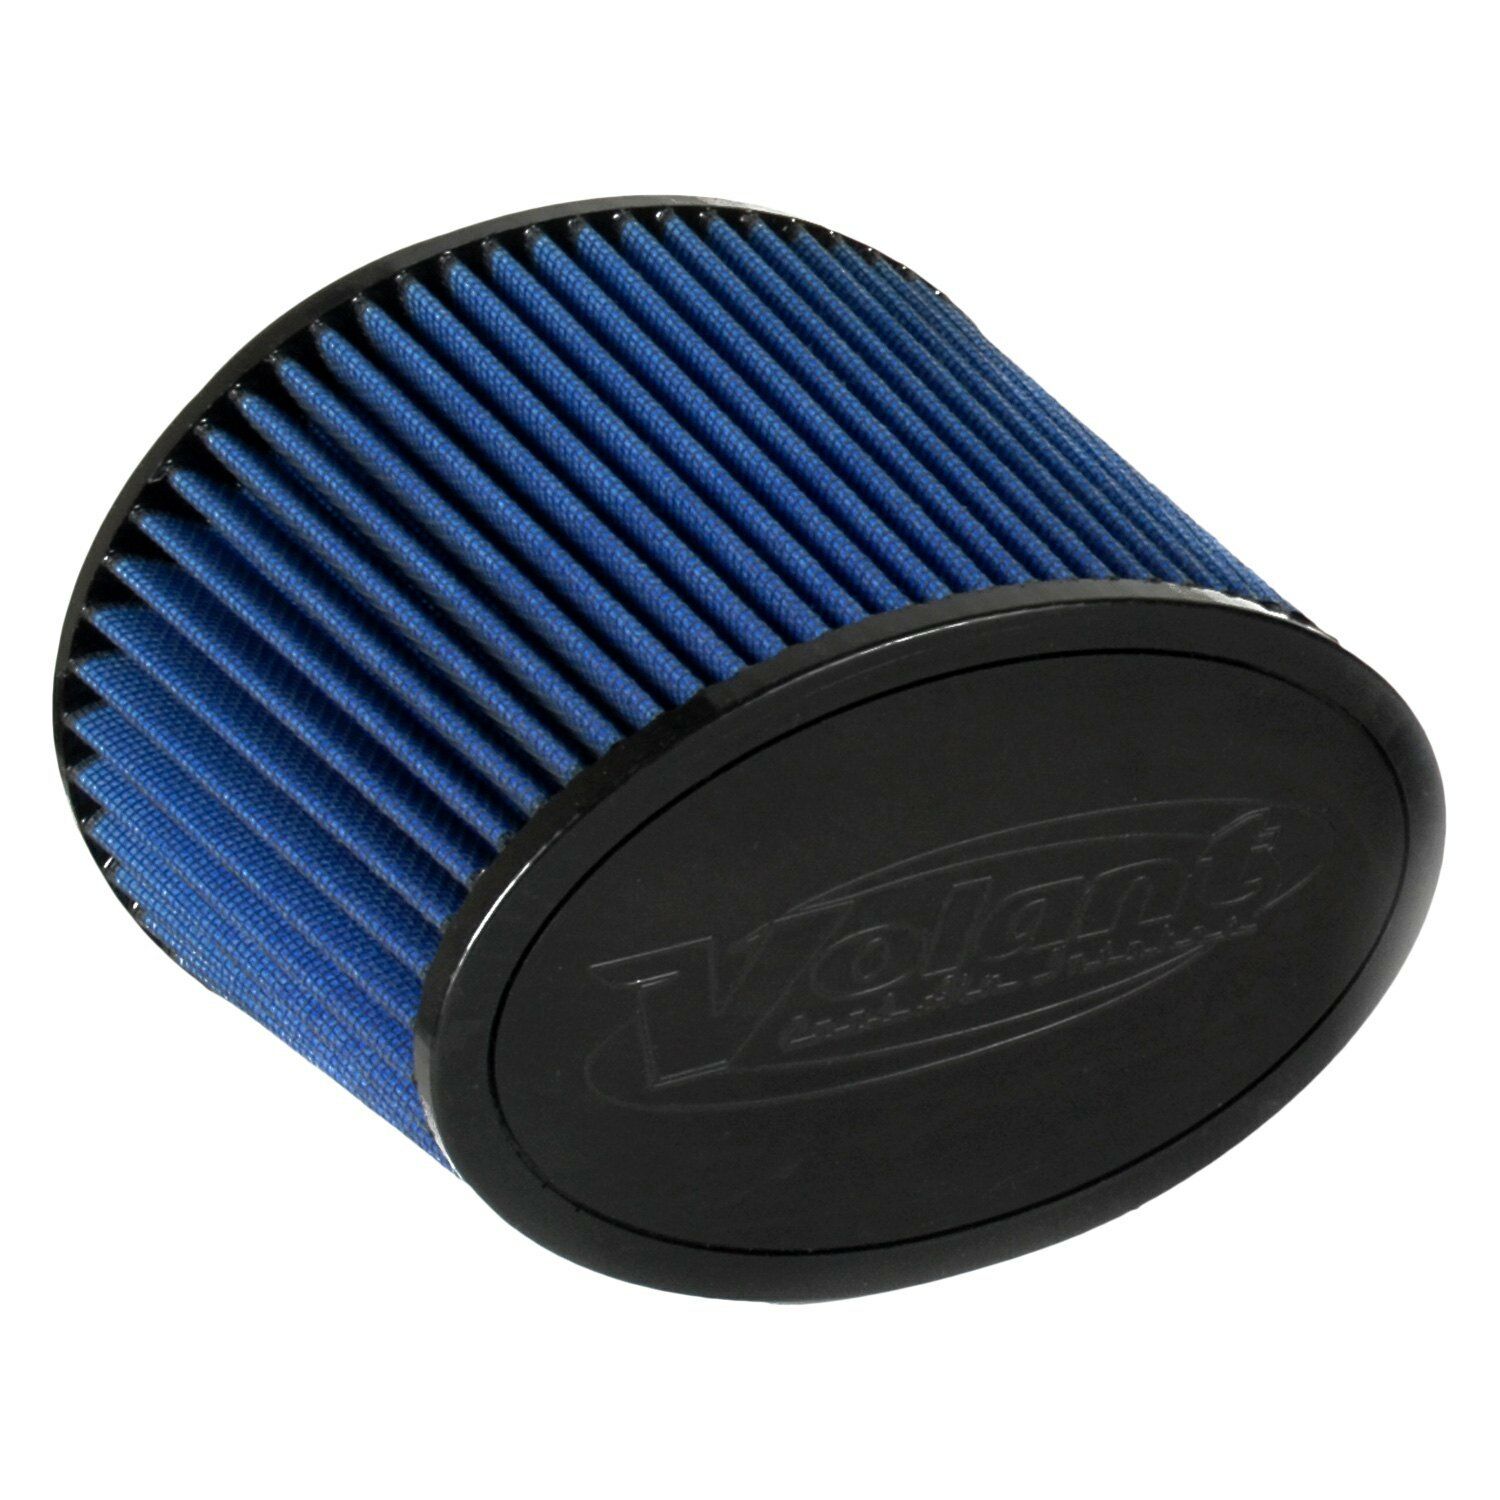 Volant Pro 5 Oval Tapered Blue Air Filter - Universal - 5144